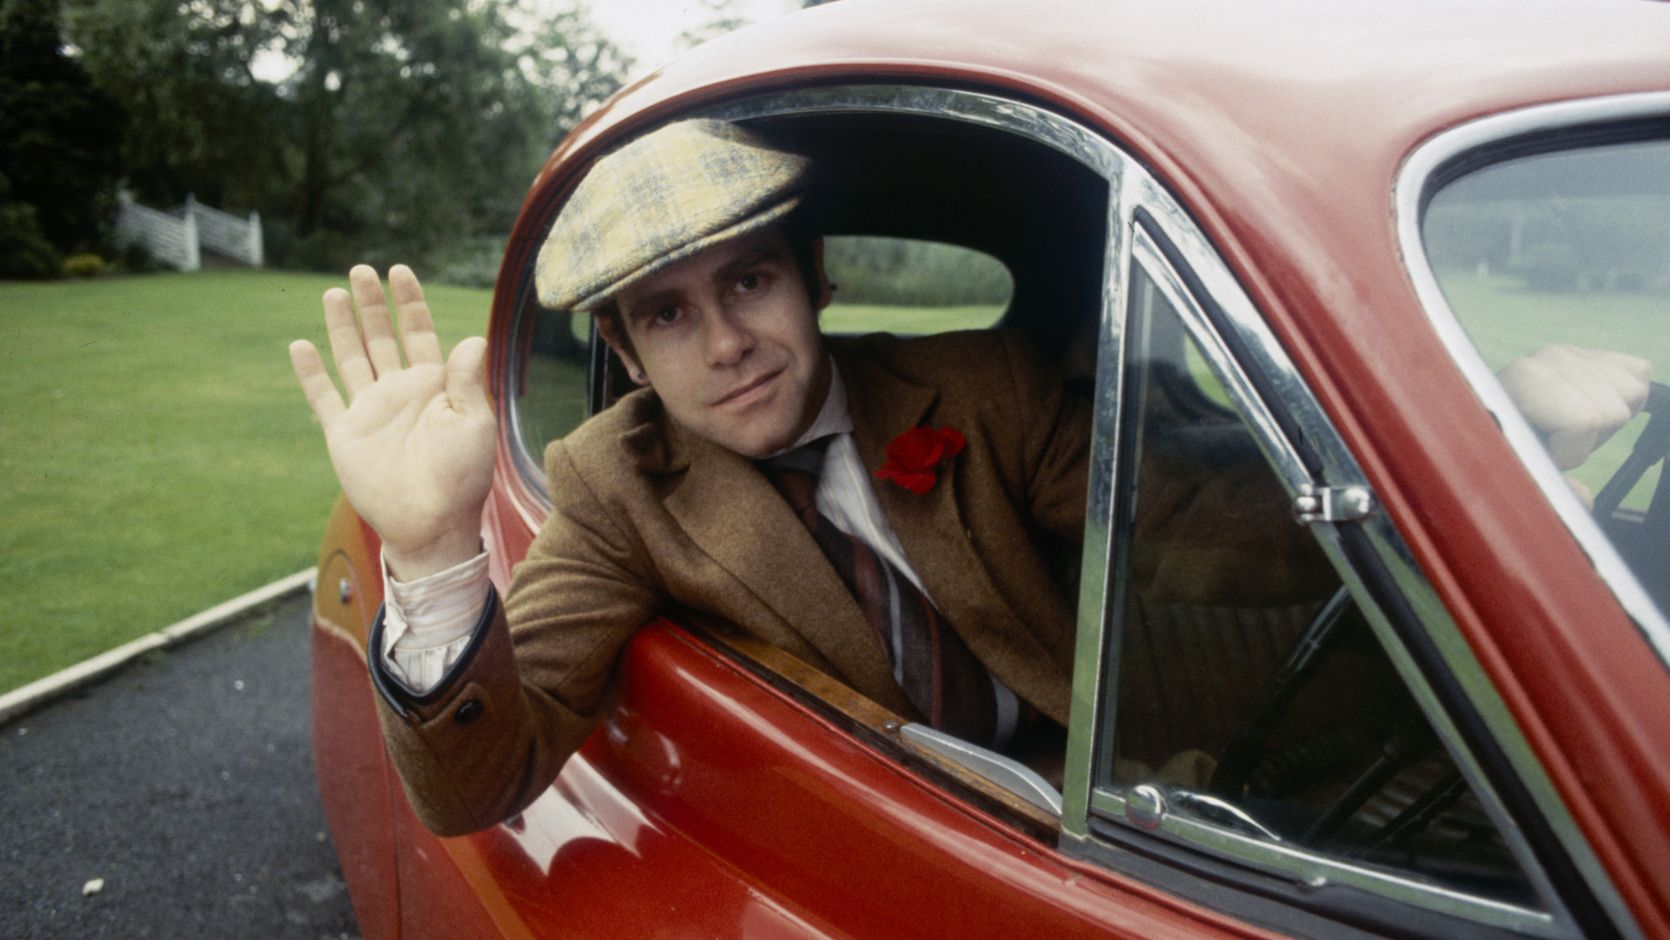 John waves from his car in 1978.